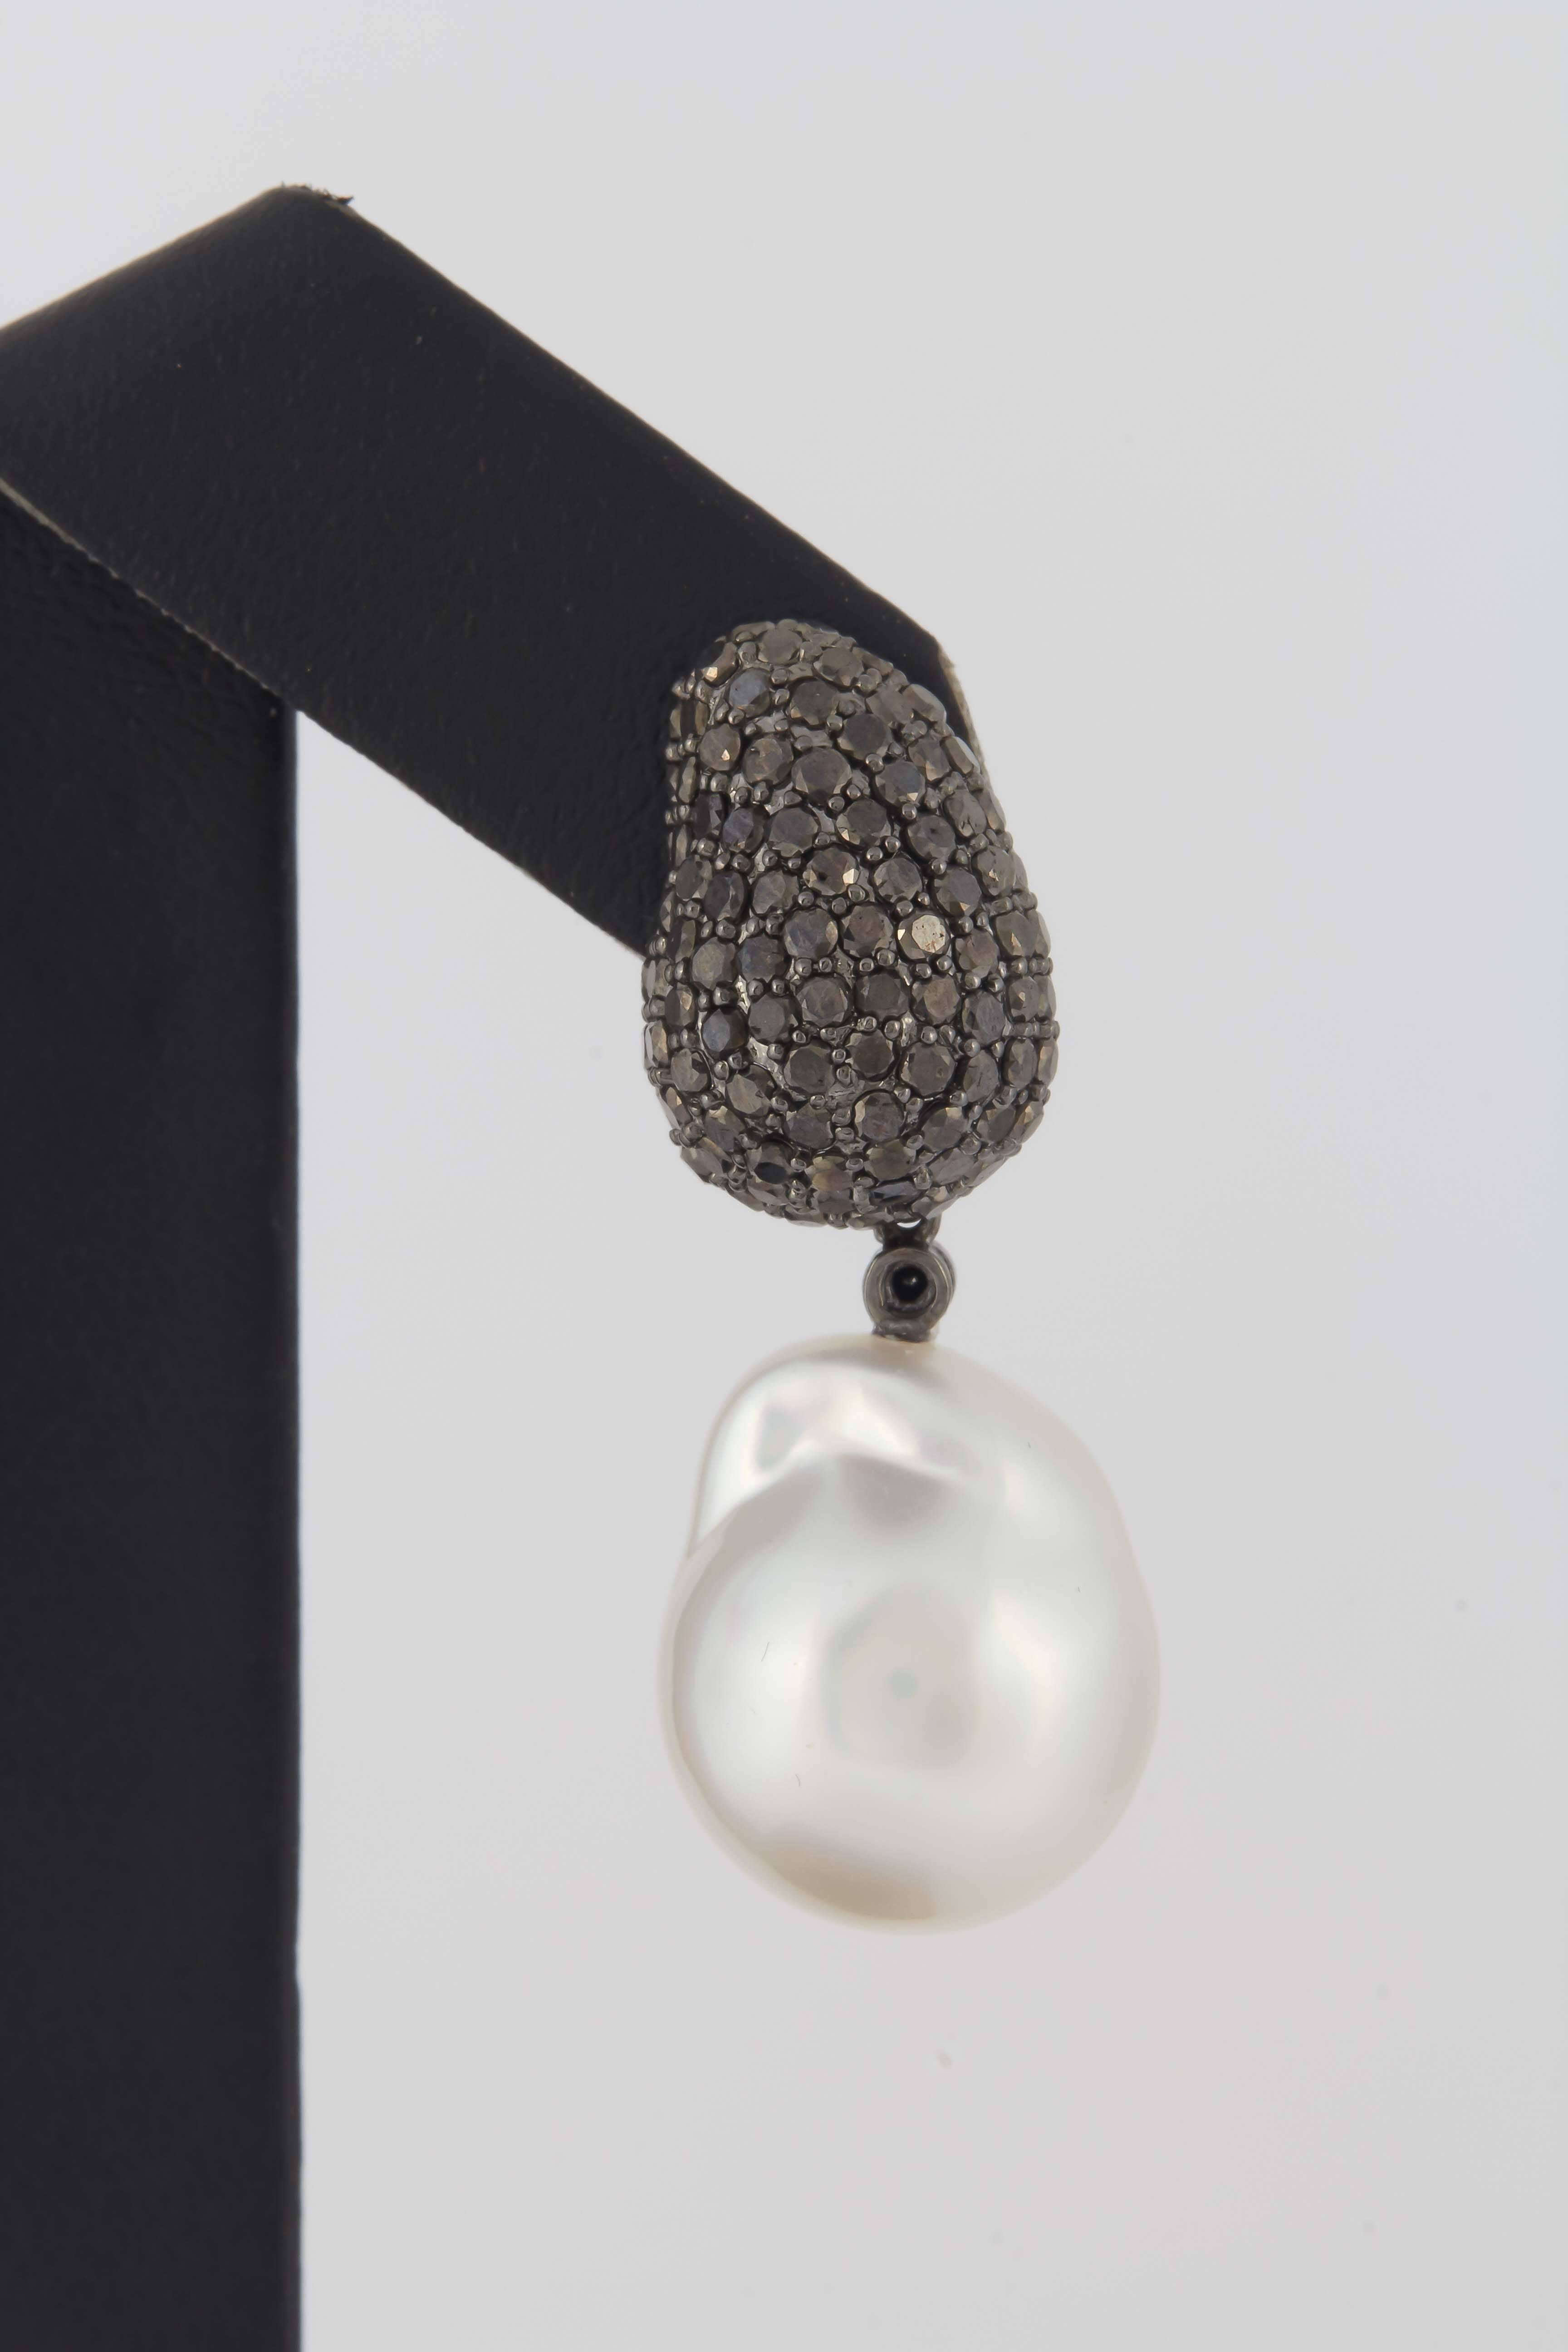 18K White gold drop earrings featuring black diamonds weighing 3.10 carats and two South Sea Pearls measuring 13-14 mm. 

Pearls can be removed and wear just the diamonds. 